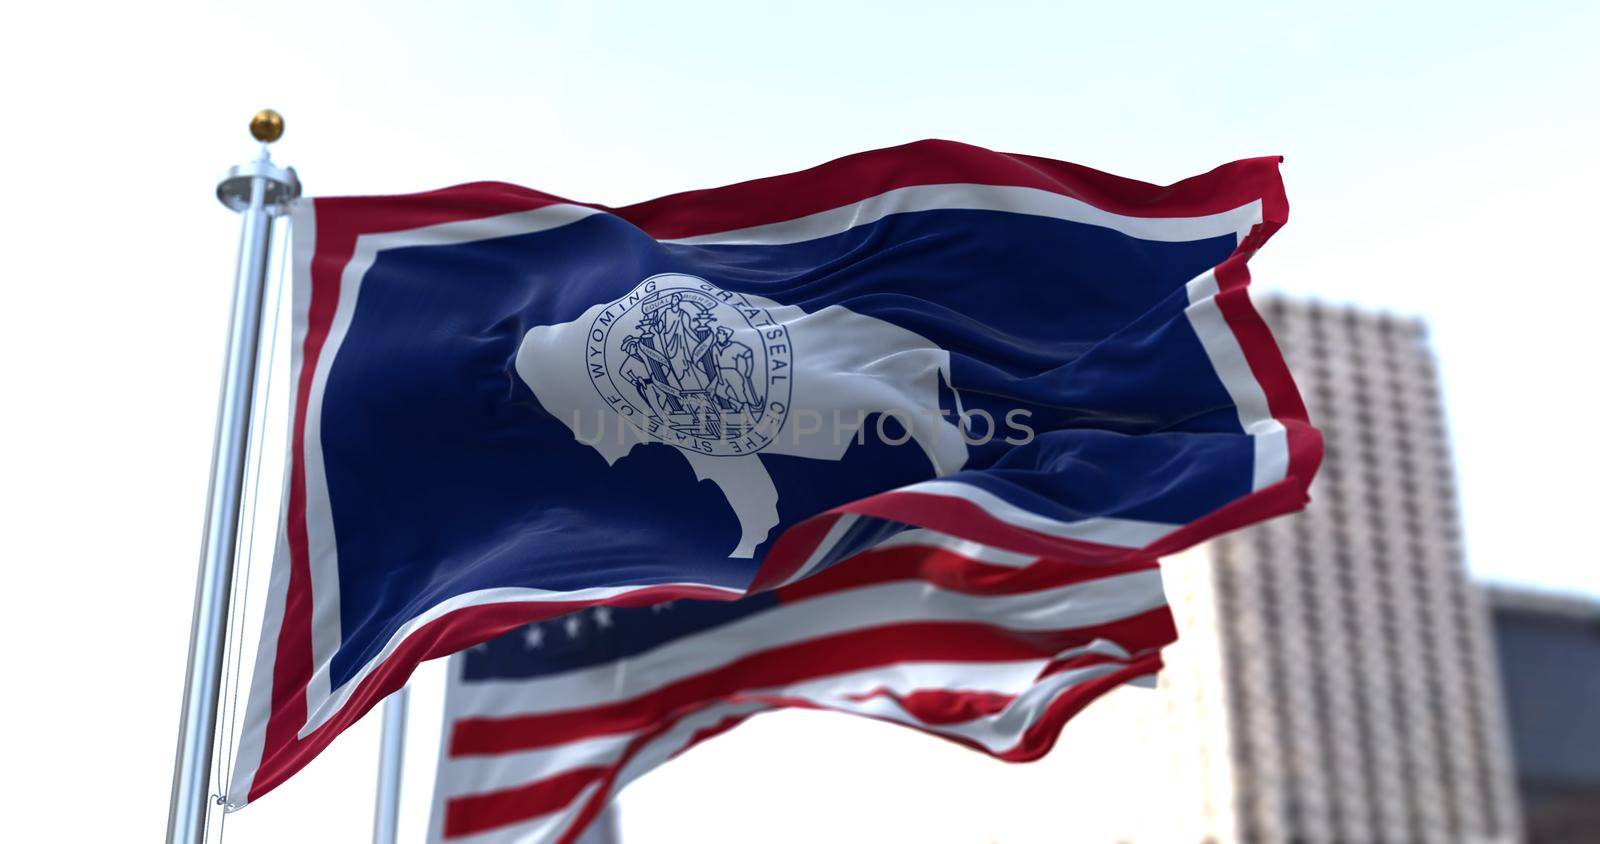 the flag of the US state of Wyoming waving in the wind with the American flag blurred in the background. Wyoming was admitted to the Union on July 10, 1890 as 44th state